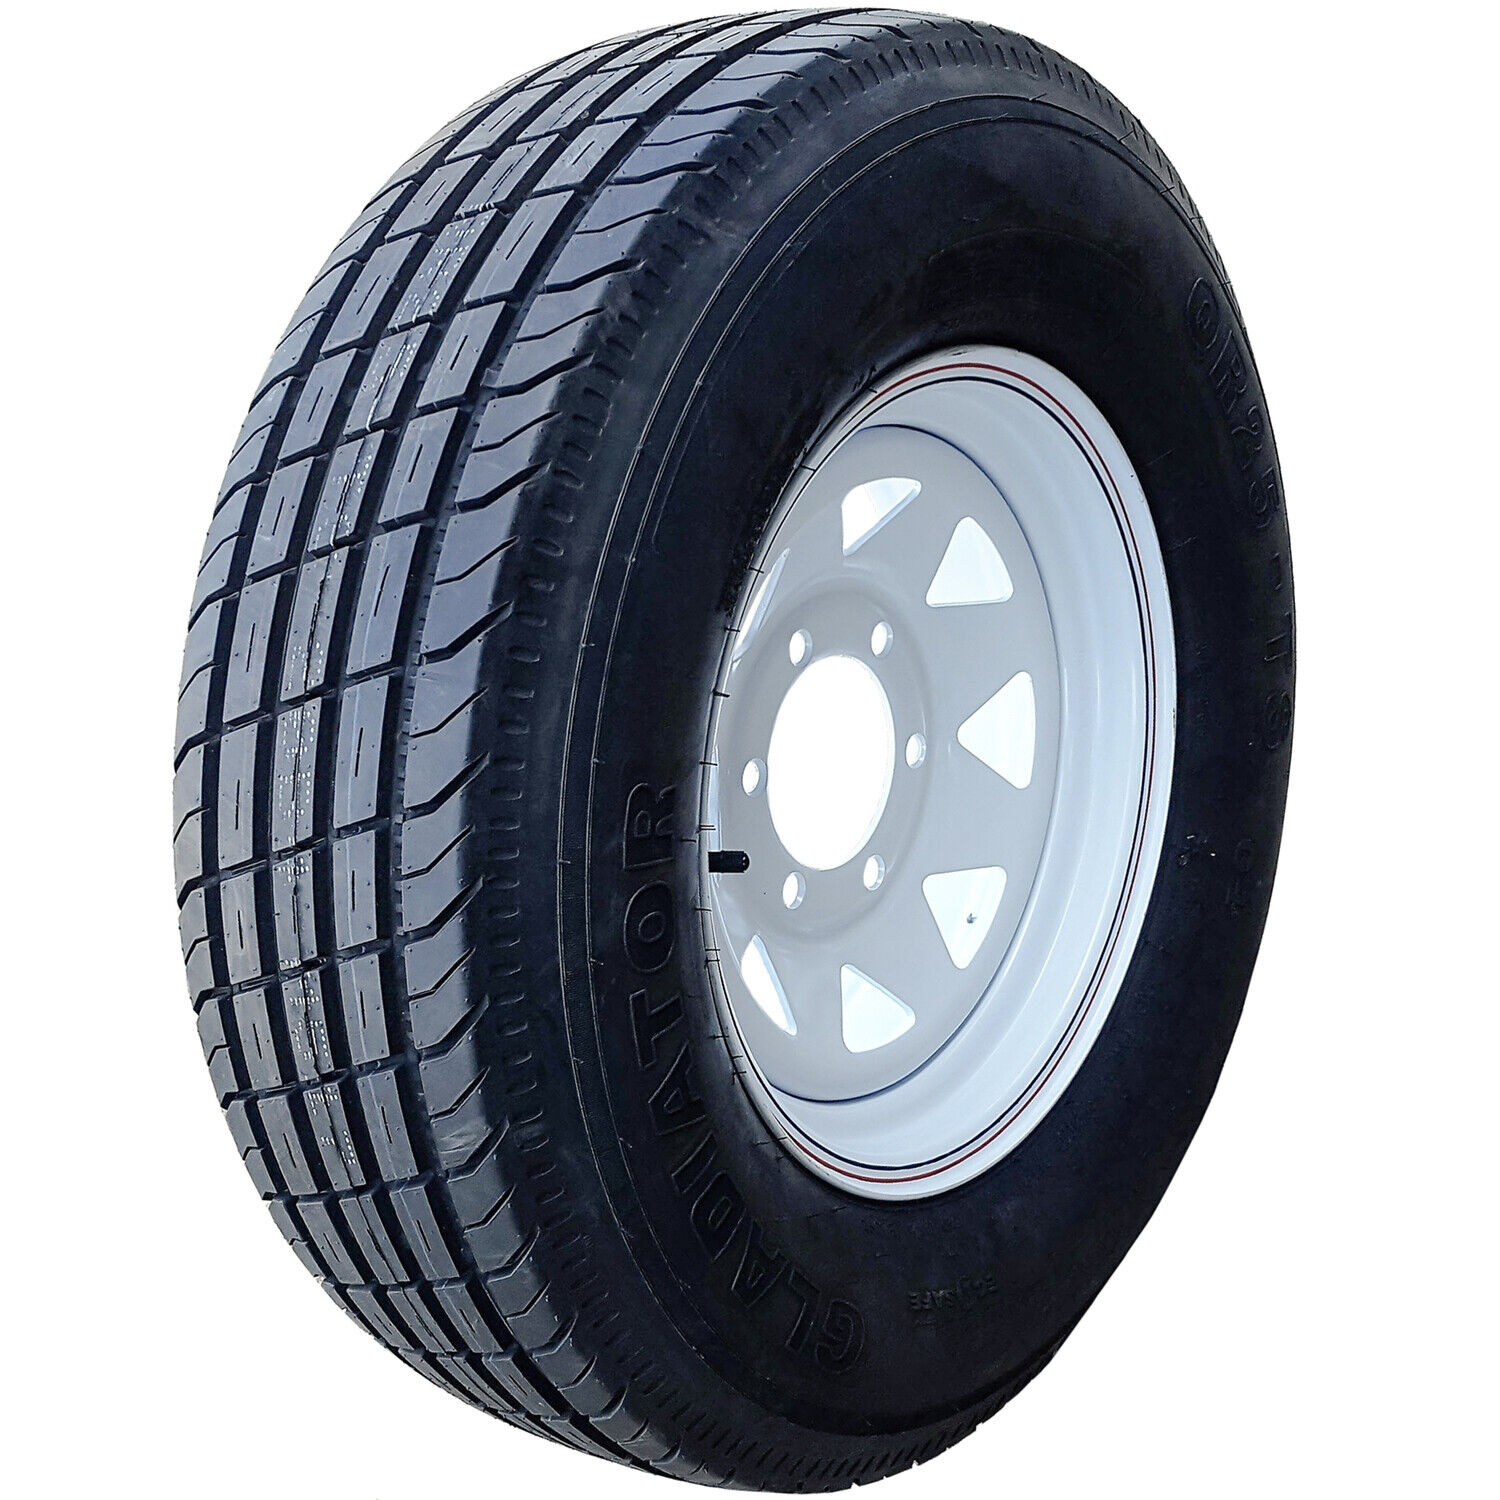 Tire ST 205/75R15 Gladiator QR25-TS Trailer Load D 8 Ply (DC)